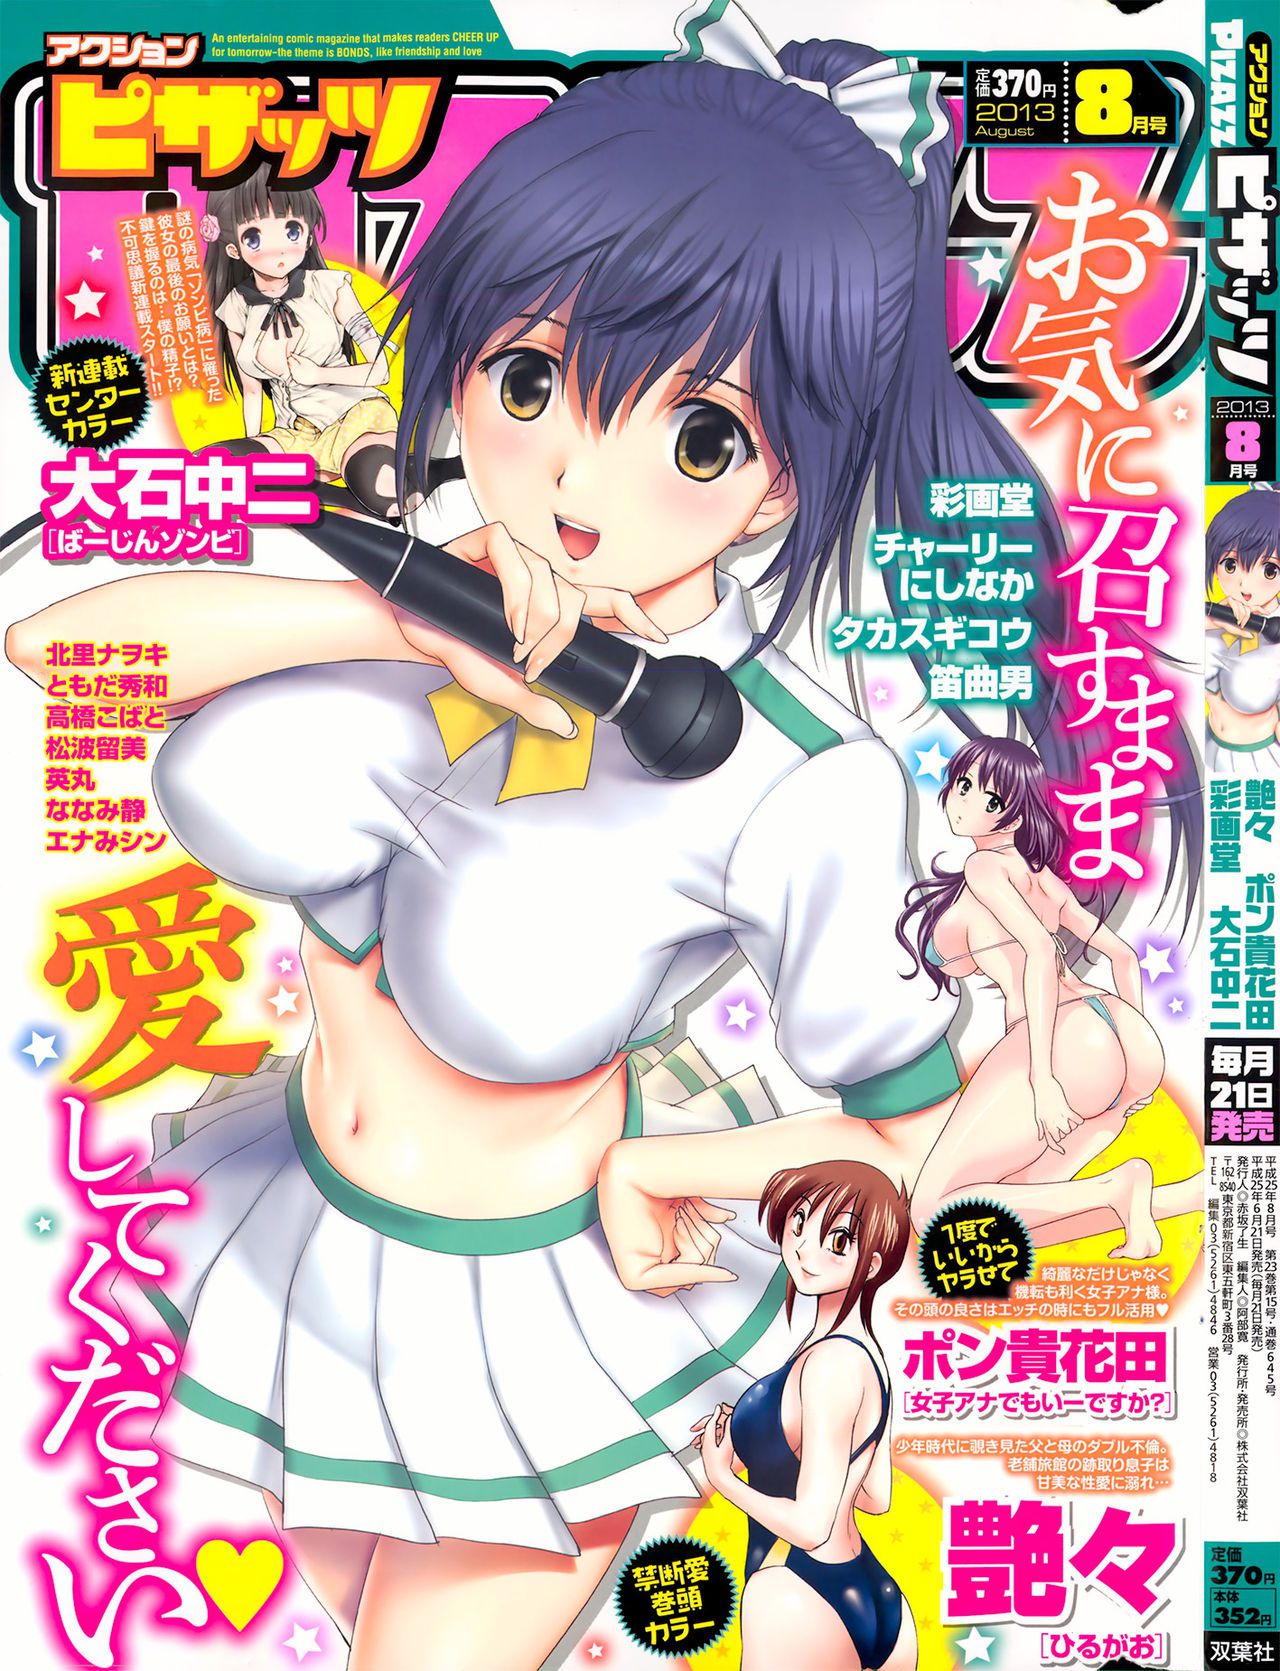 [Saigado] Cover Illustrations [彩画堂] Cover Illustrations 66